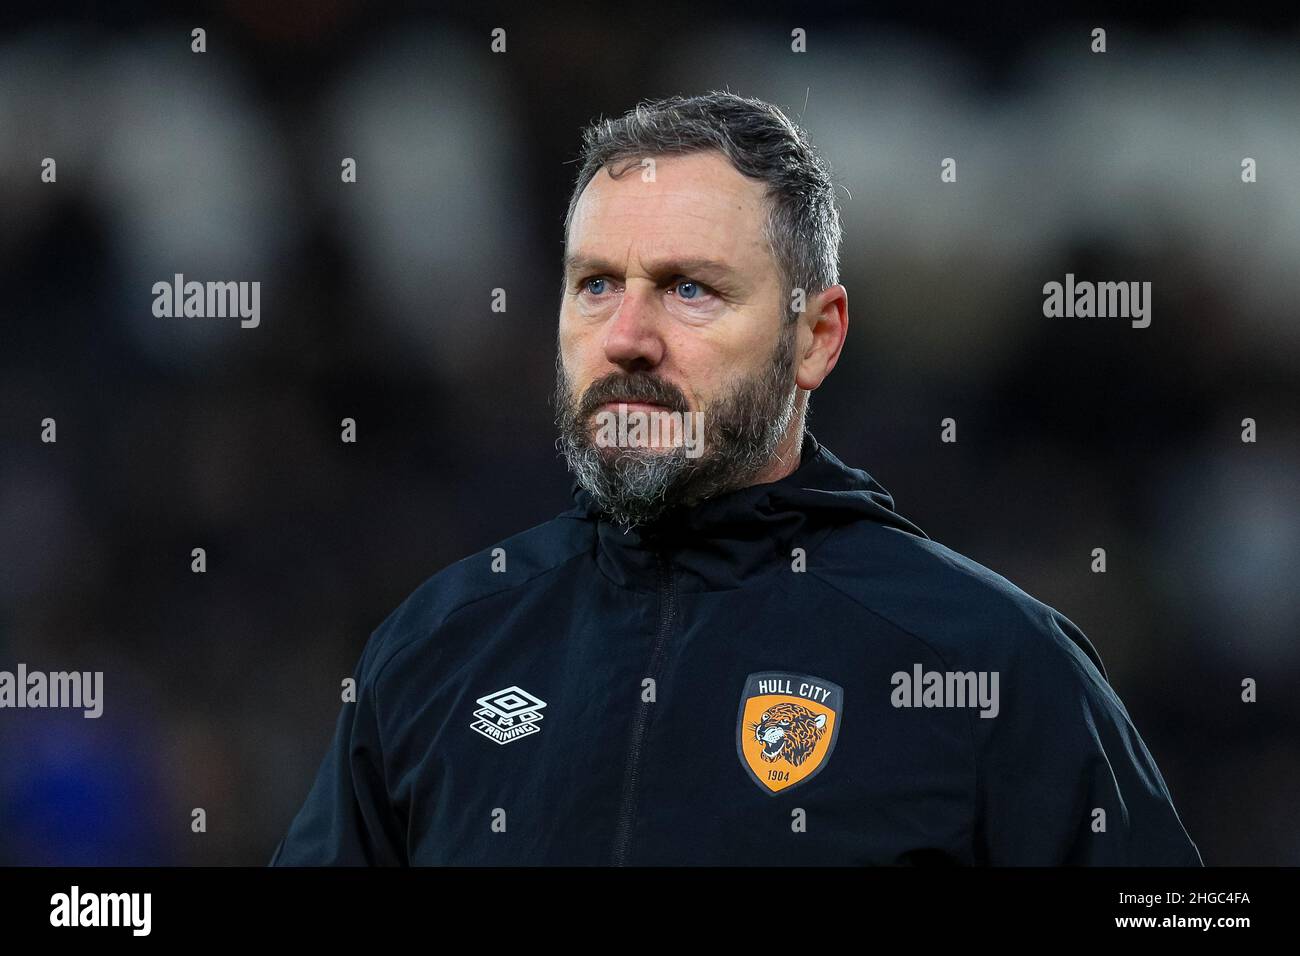 Hull, UK. 19th Jan, 2022. Hull City FC goalkeeping coach Barry Richardson ahead of the game in Hull, United Kingdom on 1/19/2022. (Photo by James Heaton/News Images/Sipa USA) Credit: Sipa USA/Alamy Live News Stock Photo